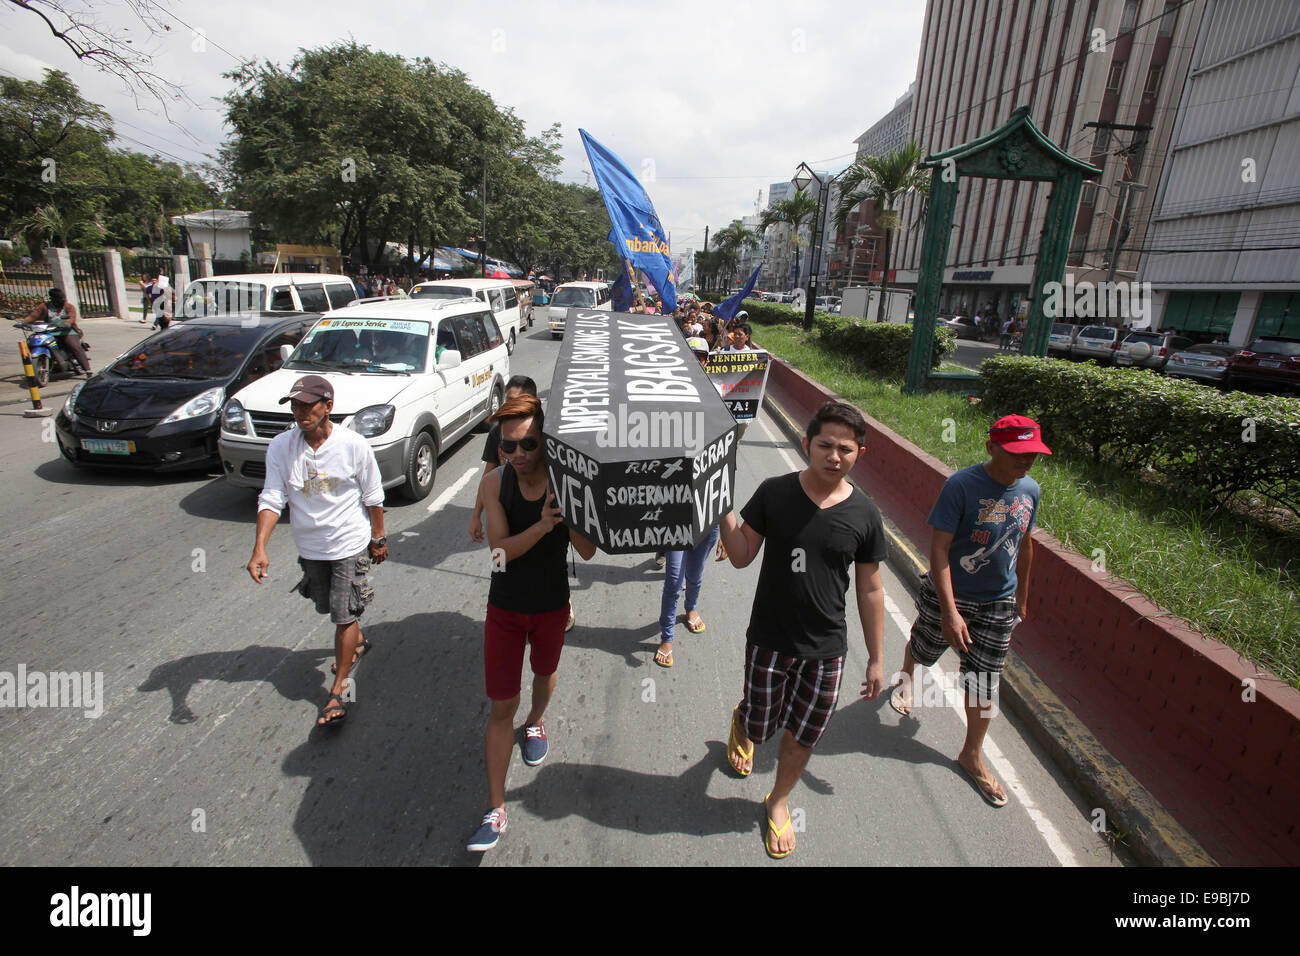 Manila. 24th Oct, 2014. Activists carry a mock coffin during a protest rally in front of the US Embassy in Manila, the Philippines on Oct. 24, 2014. The protesters demand justice for a Filipino transgender, Jeffrey 'Jennifer' Laude, who was allegedly killed by US Marine Private First Class Joseph Scott Pemberton. Credit:  Rouelle Umali/Xinhua/Alamy Live News Stock Photo